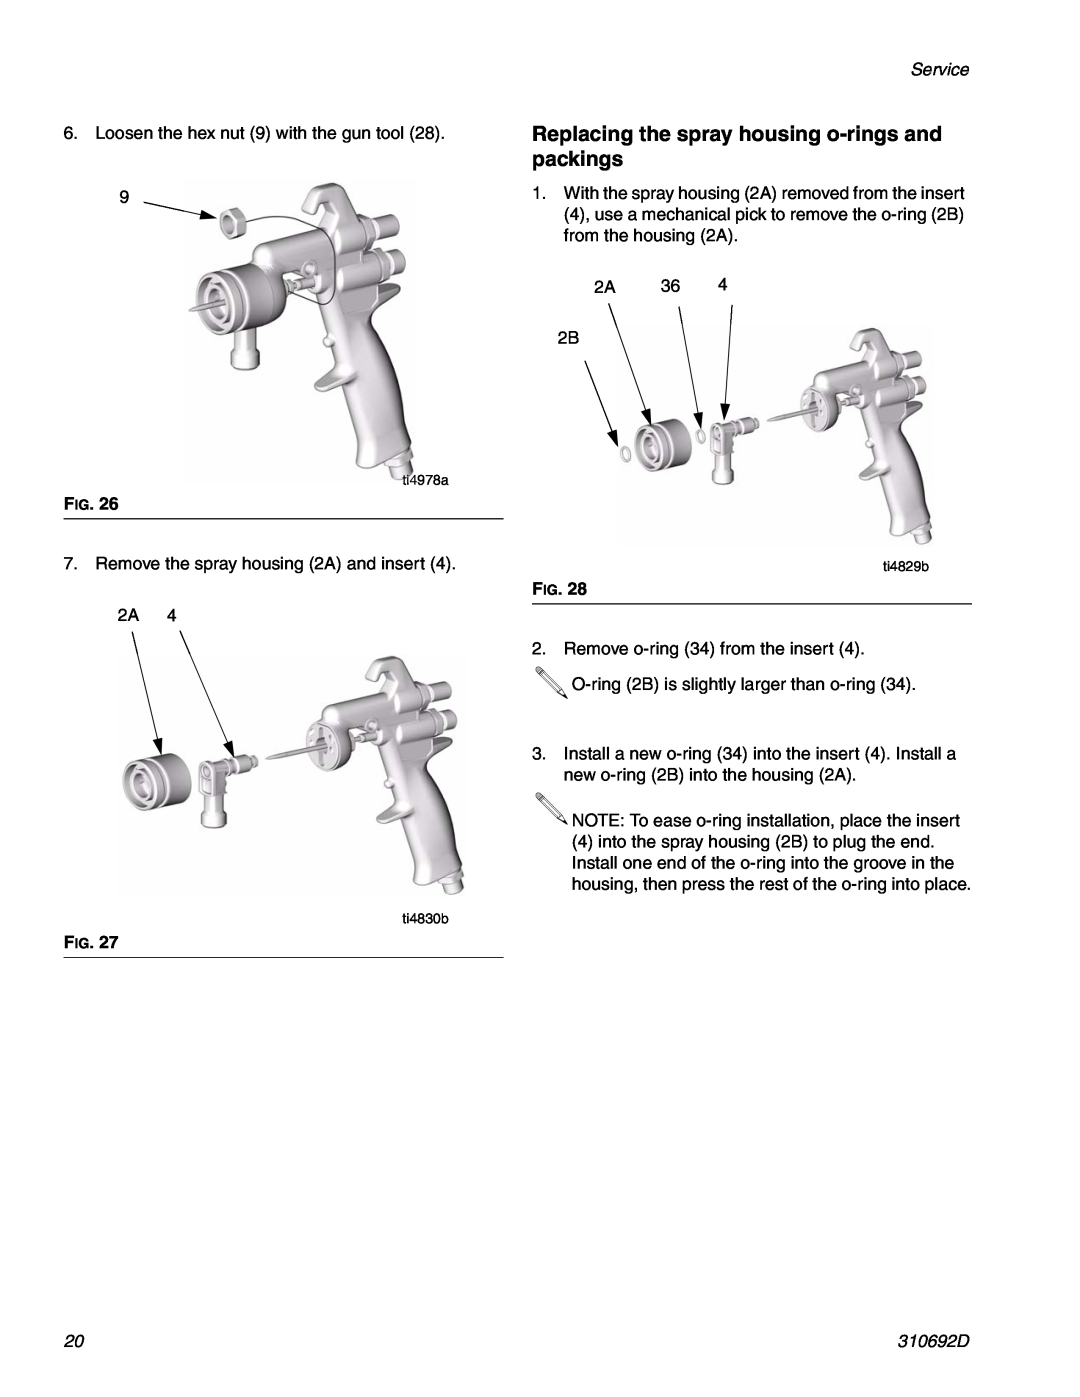 Graco 310692D important safety instructions Replacing the spray housing o-rings and packings, Service 